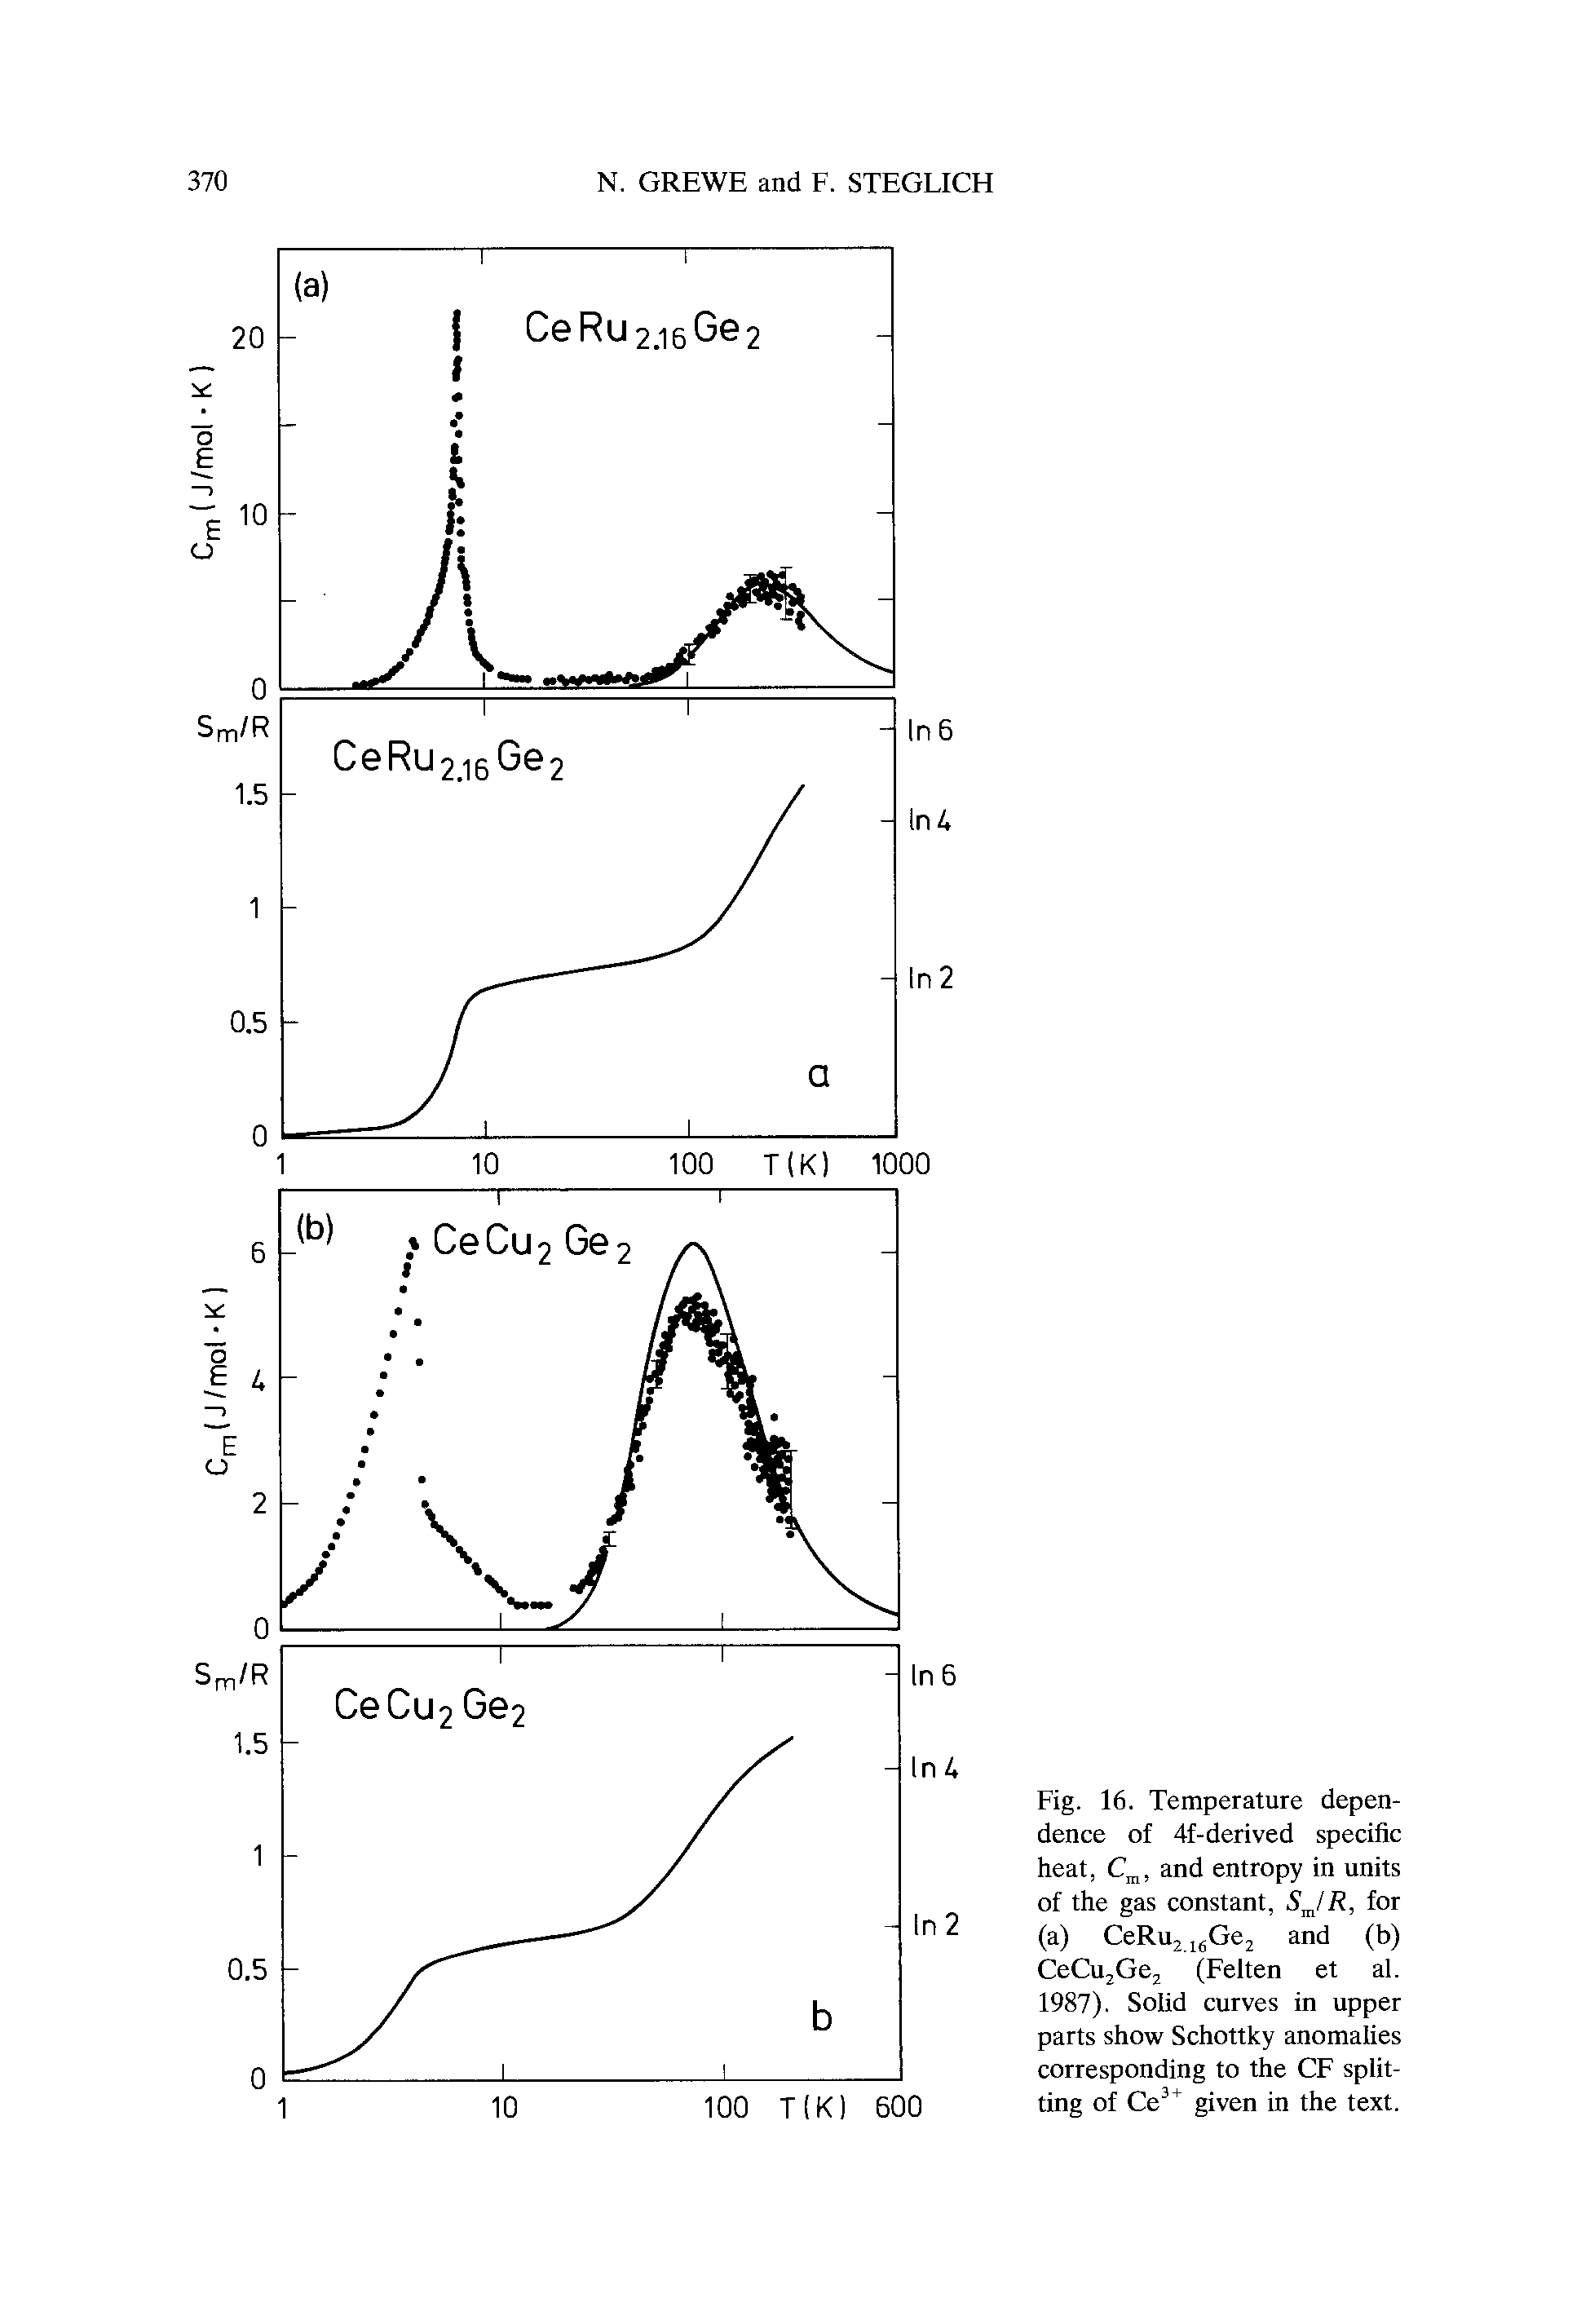 Fig. 16. Temperature dependence of 4f-derived specific heat, C, and entropy in units of the gas constant, SJR, for (a) CeRu j Gcj and (b) CeCu GCj (Felten et al. 1987). Solid curves in upper parts show Schottky anomalies corresponding to the CF splitting of Ce given in the text.